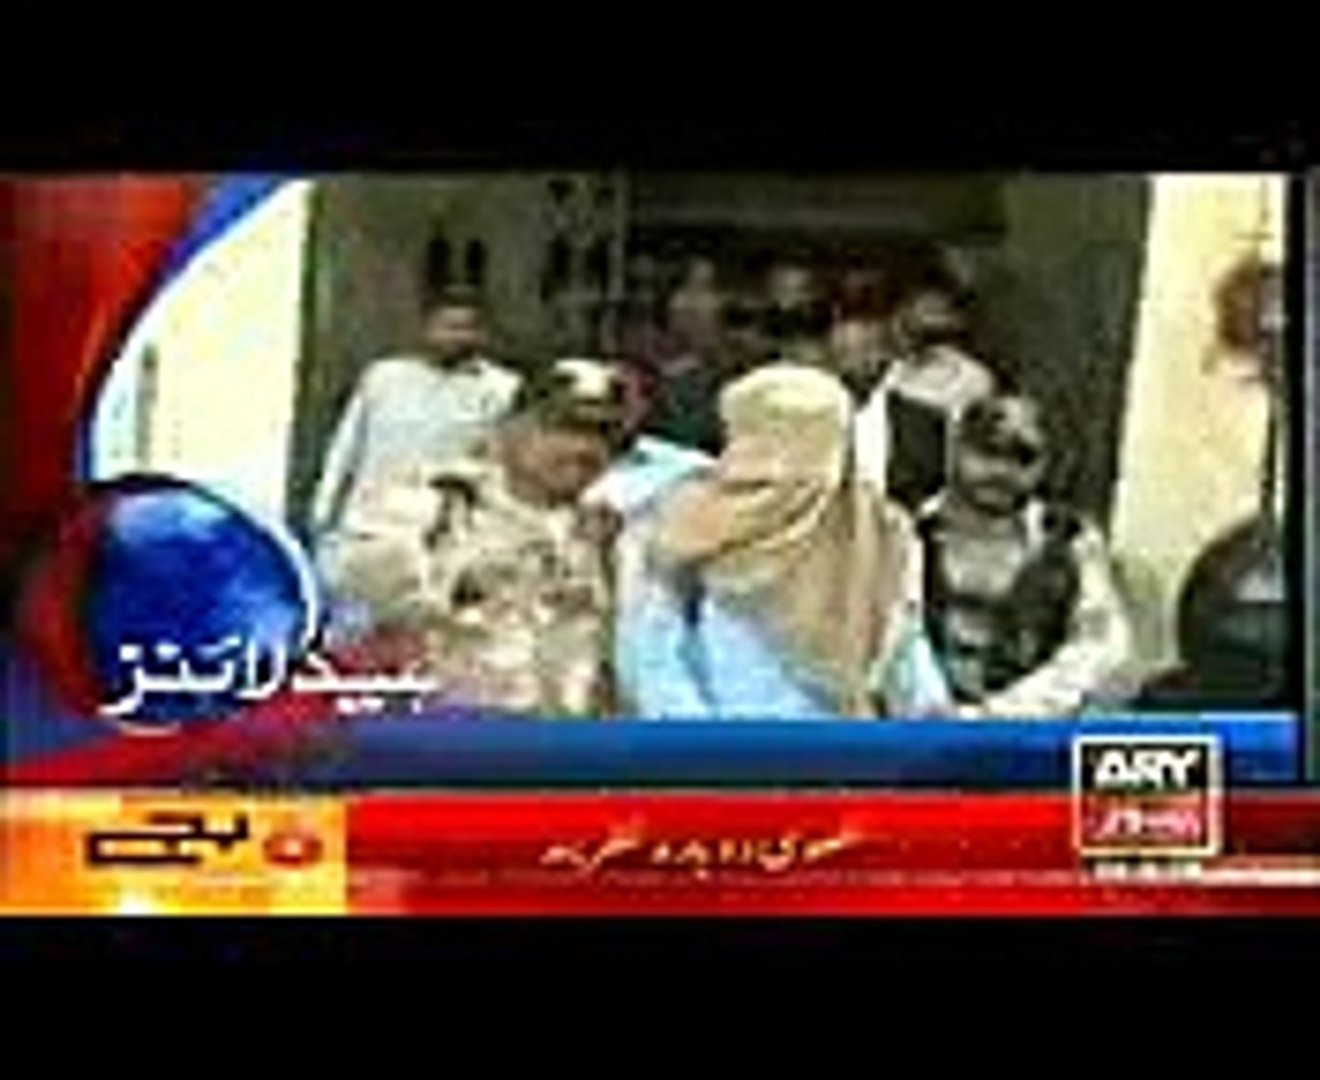 ARY News Headlines Today 15 March 2015, Latest News Updates Pakistan 15th March 2015